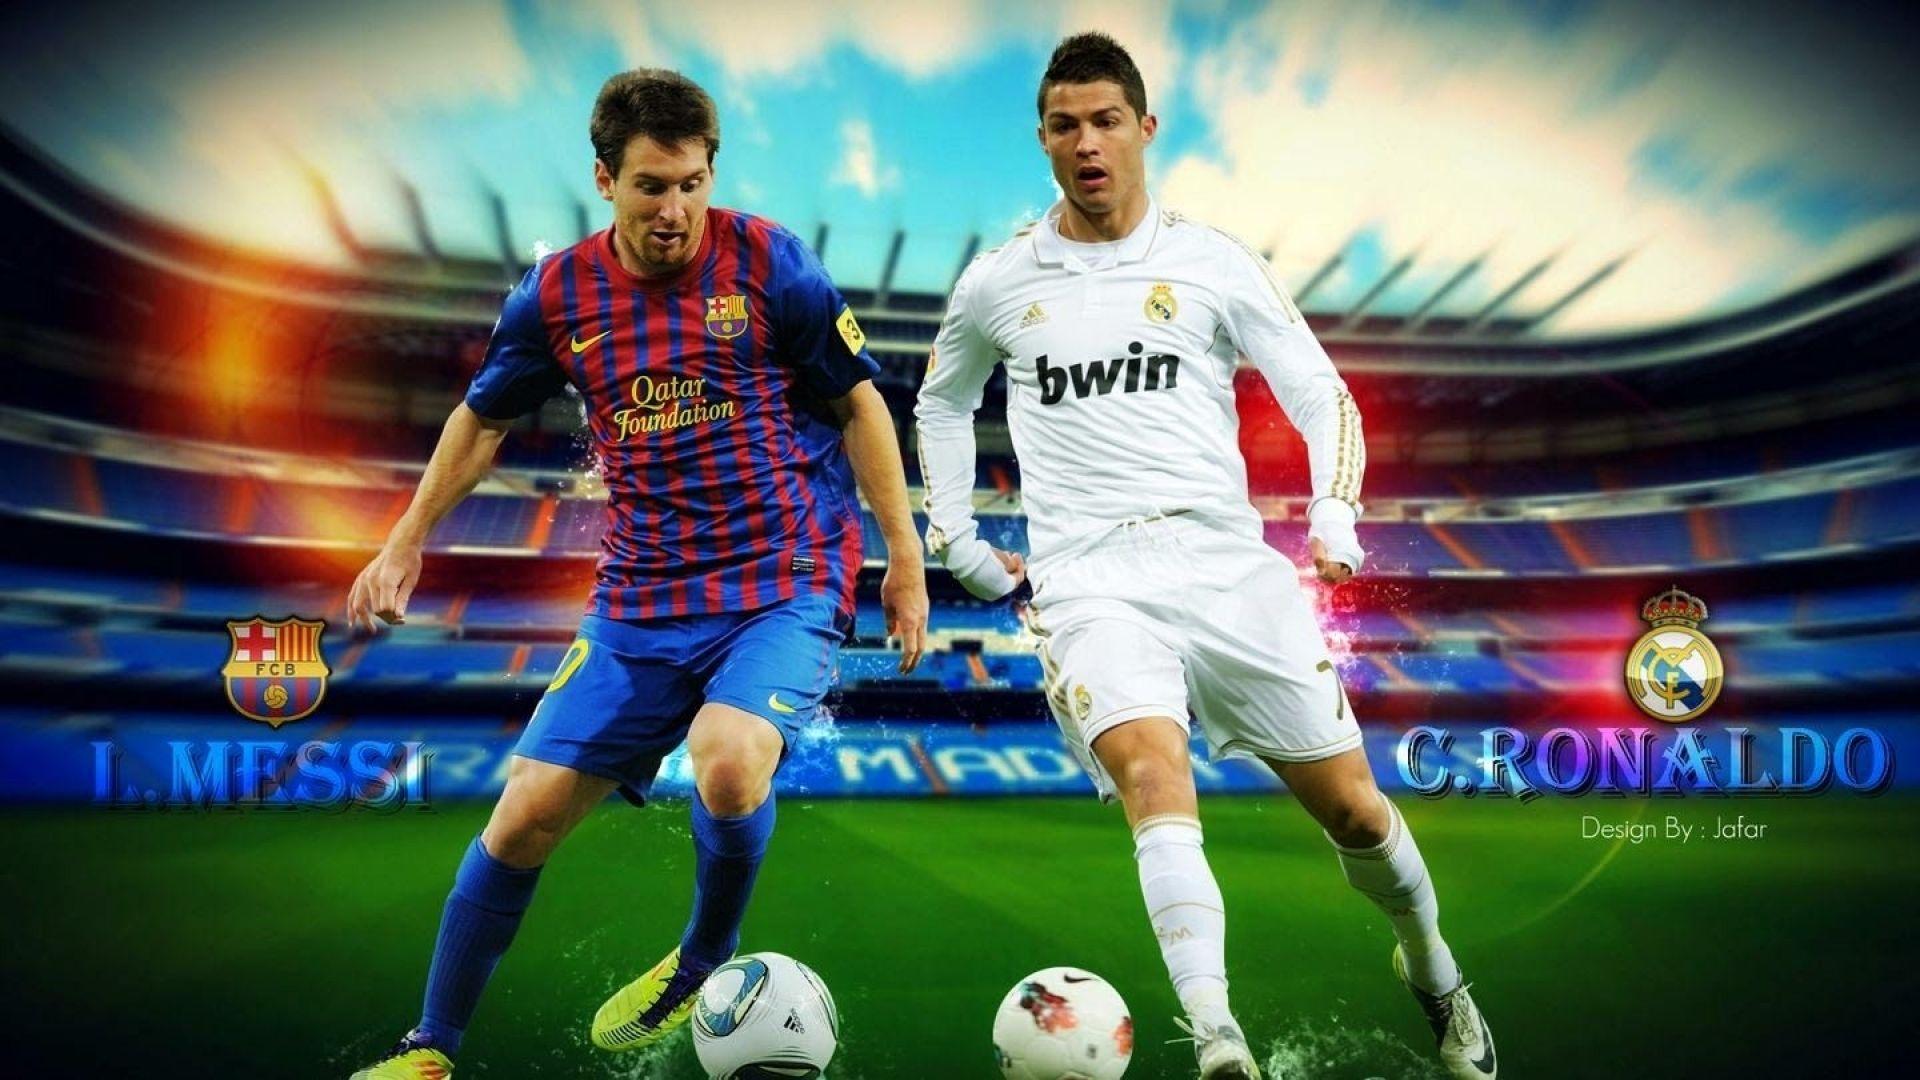 Wallpapers Cr7 e Messi FULL HD